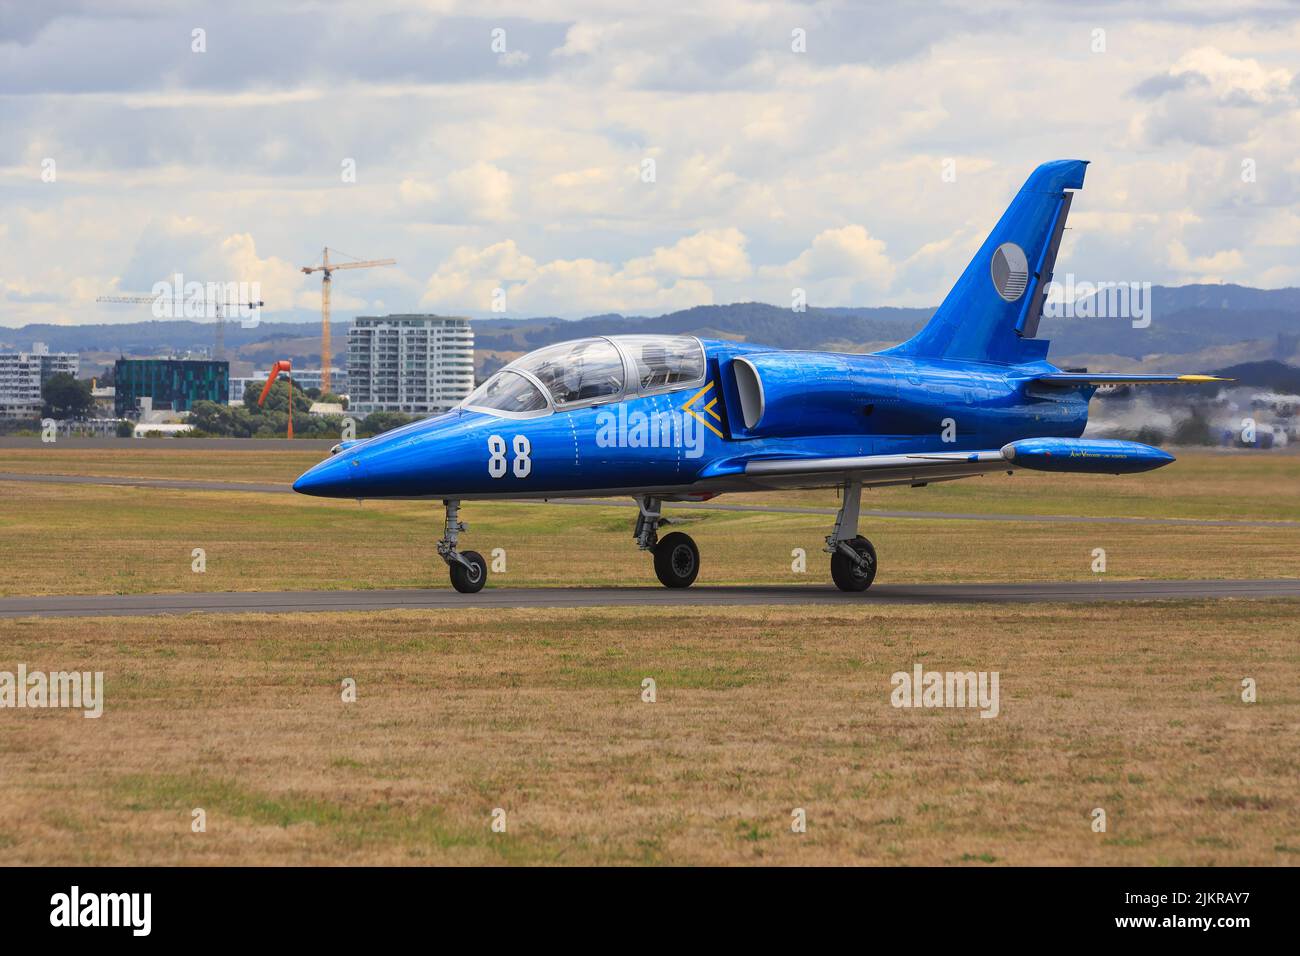 An Aero L-39 Albatros, a high-performance jet trainer aircraft made in Czechoslovakia, on a runway Stock Photo